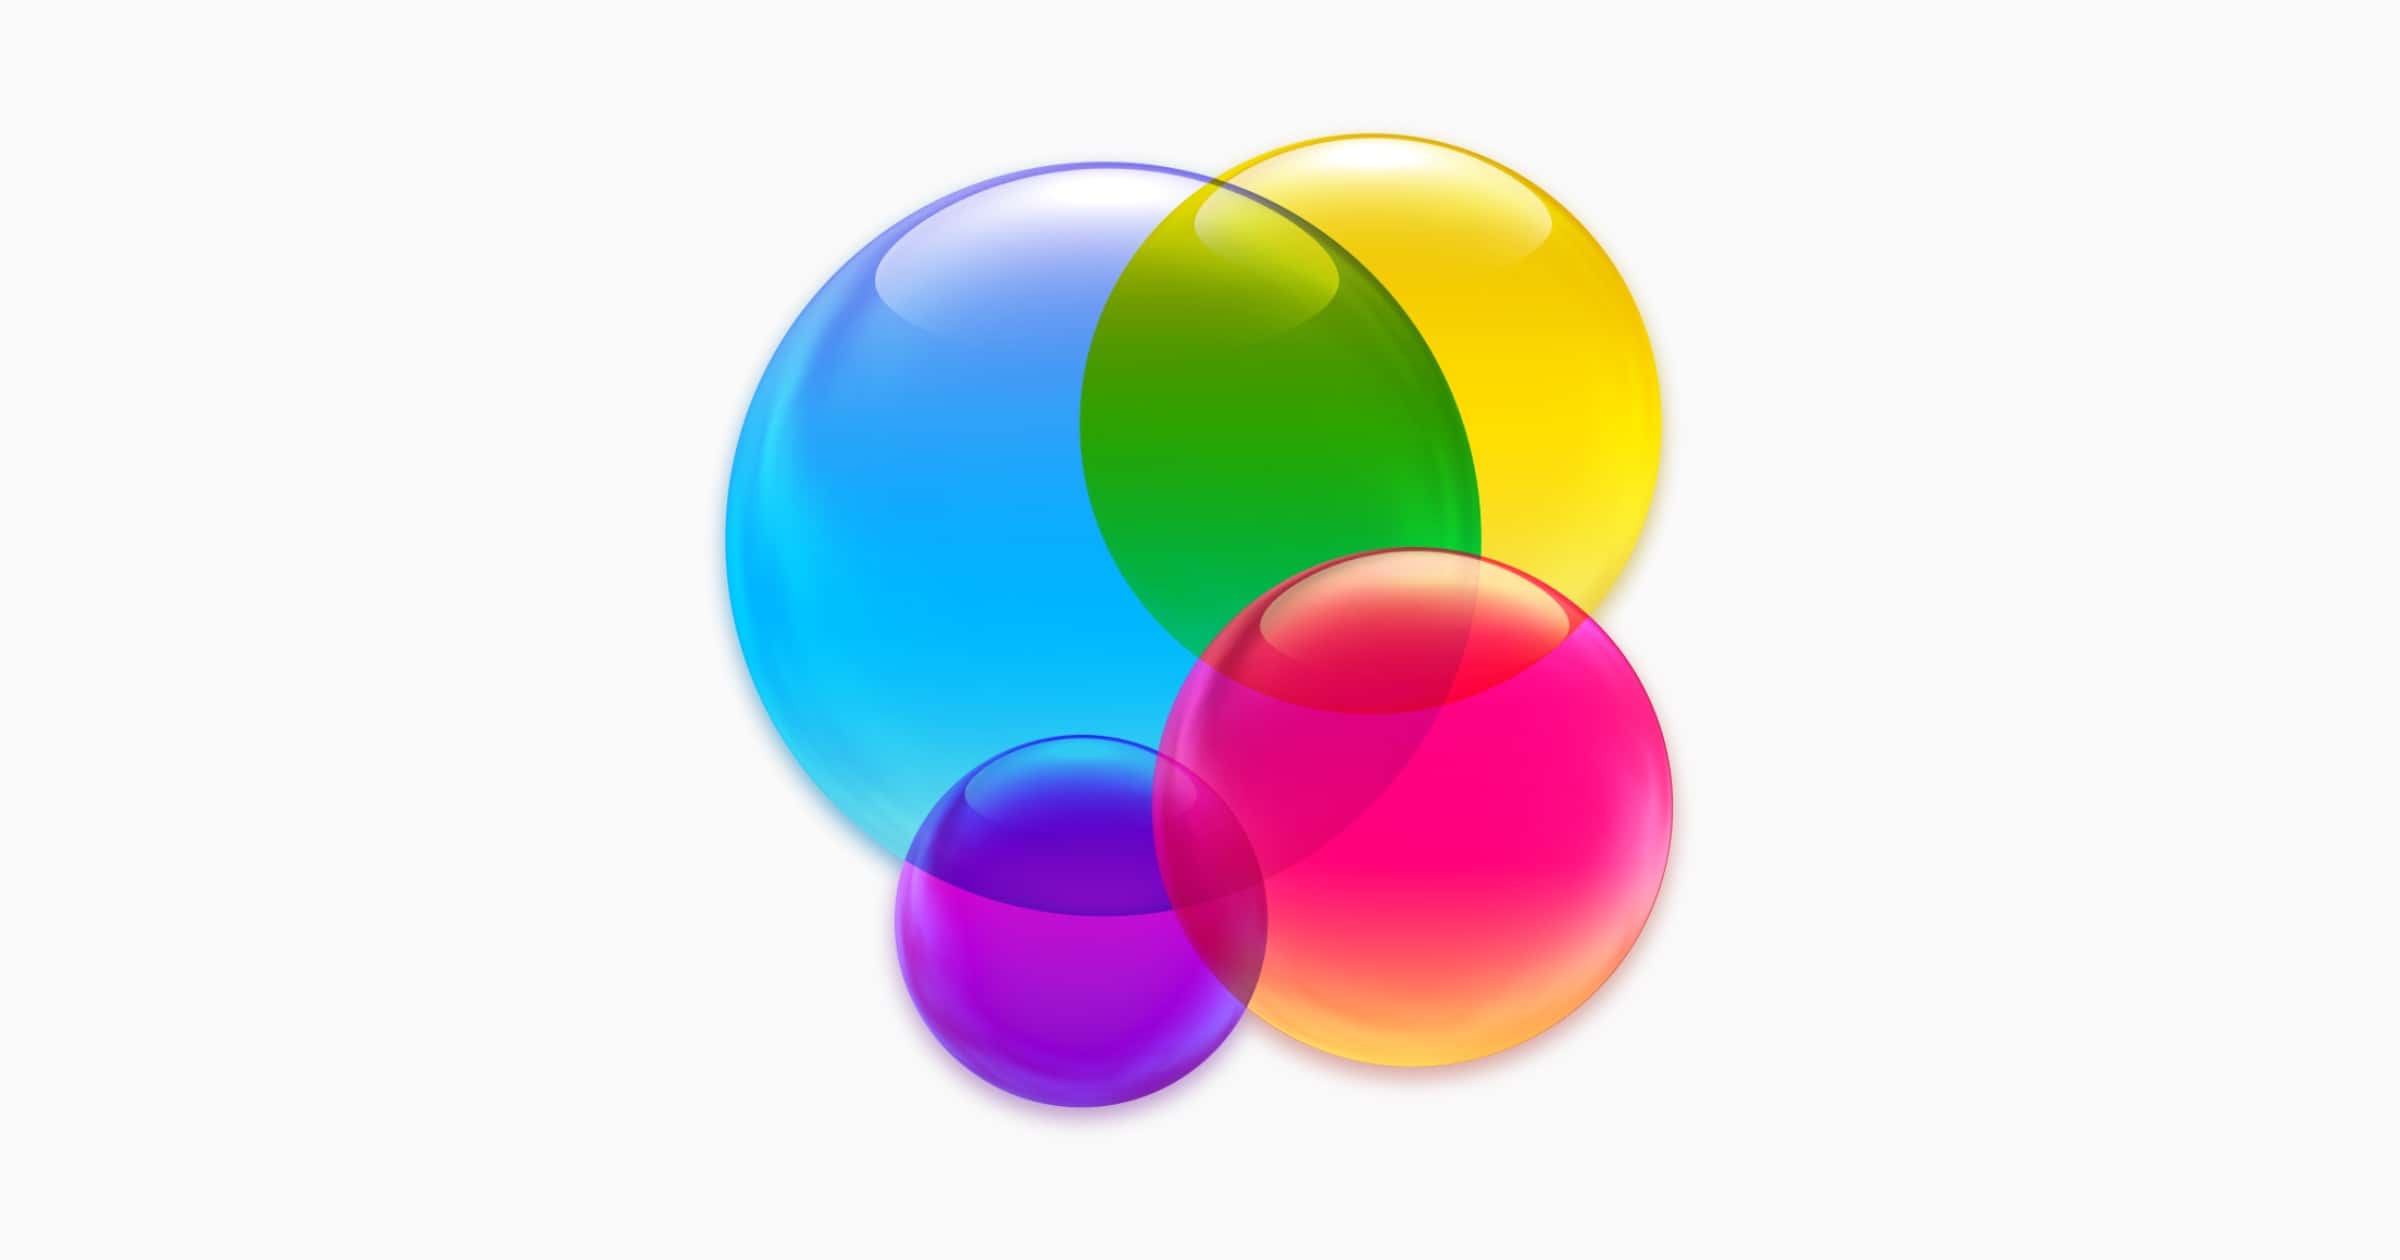 What’s New in iOS 14 Game Center? Everything